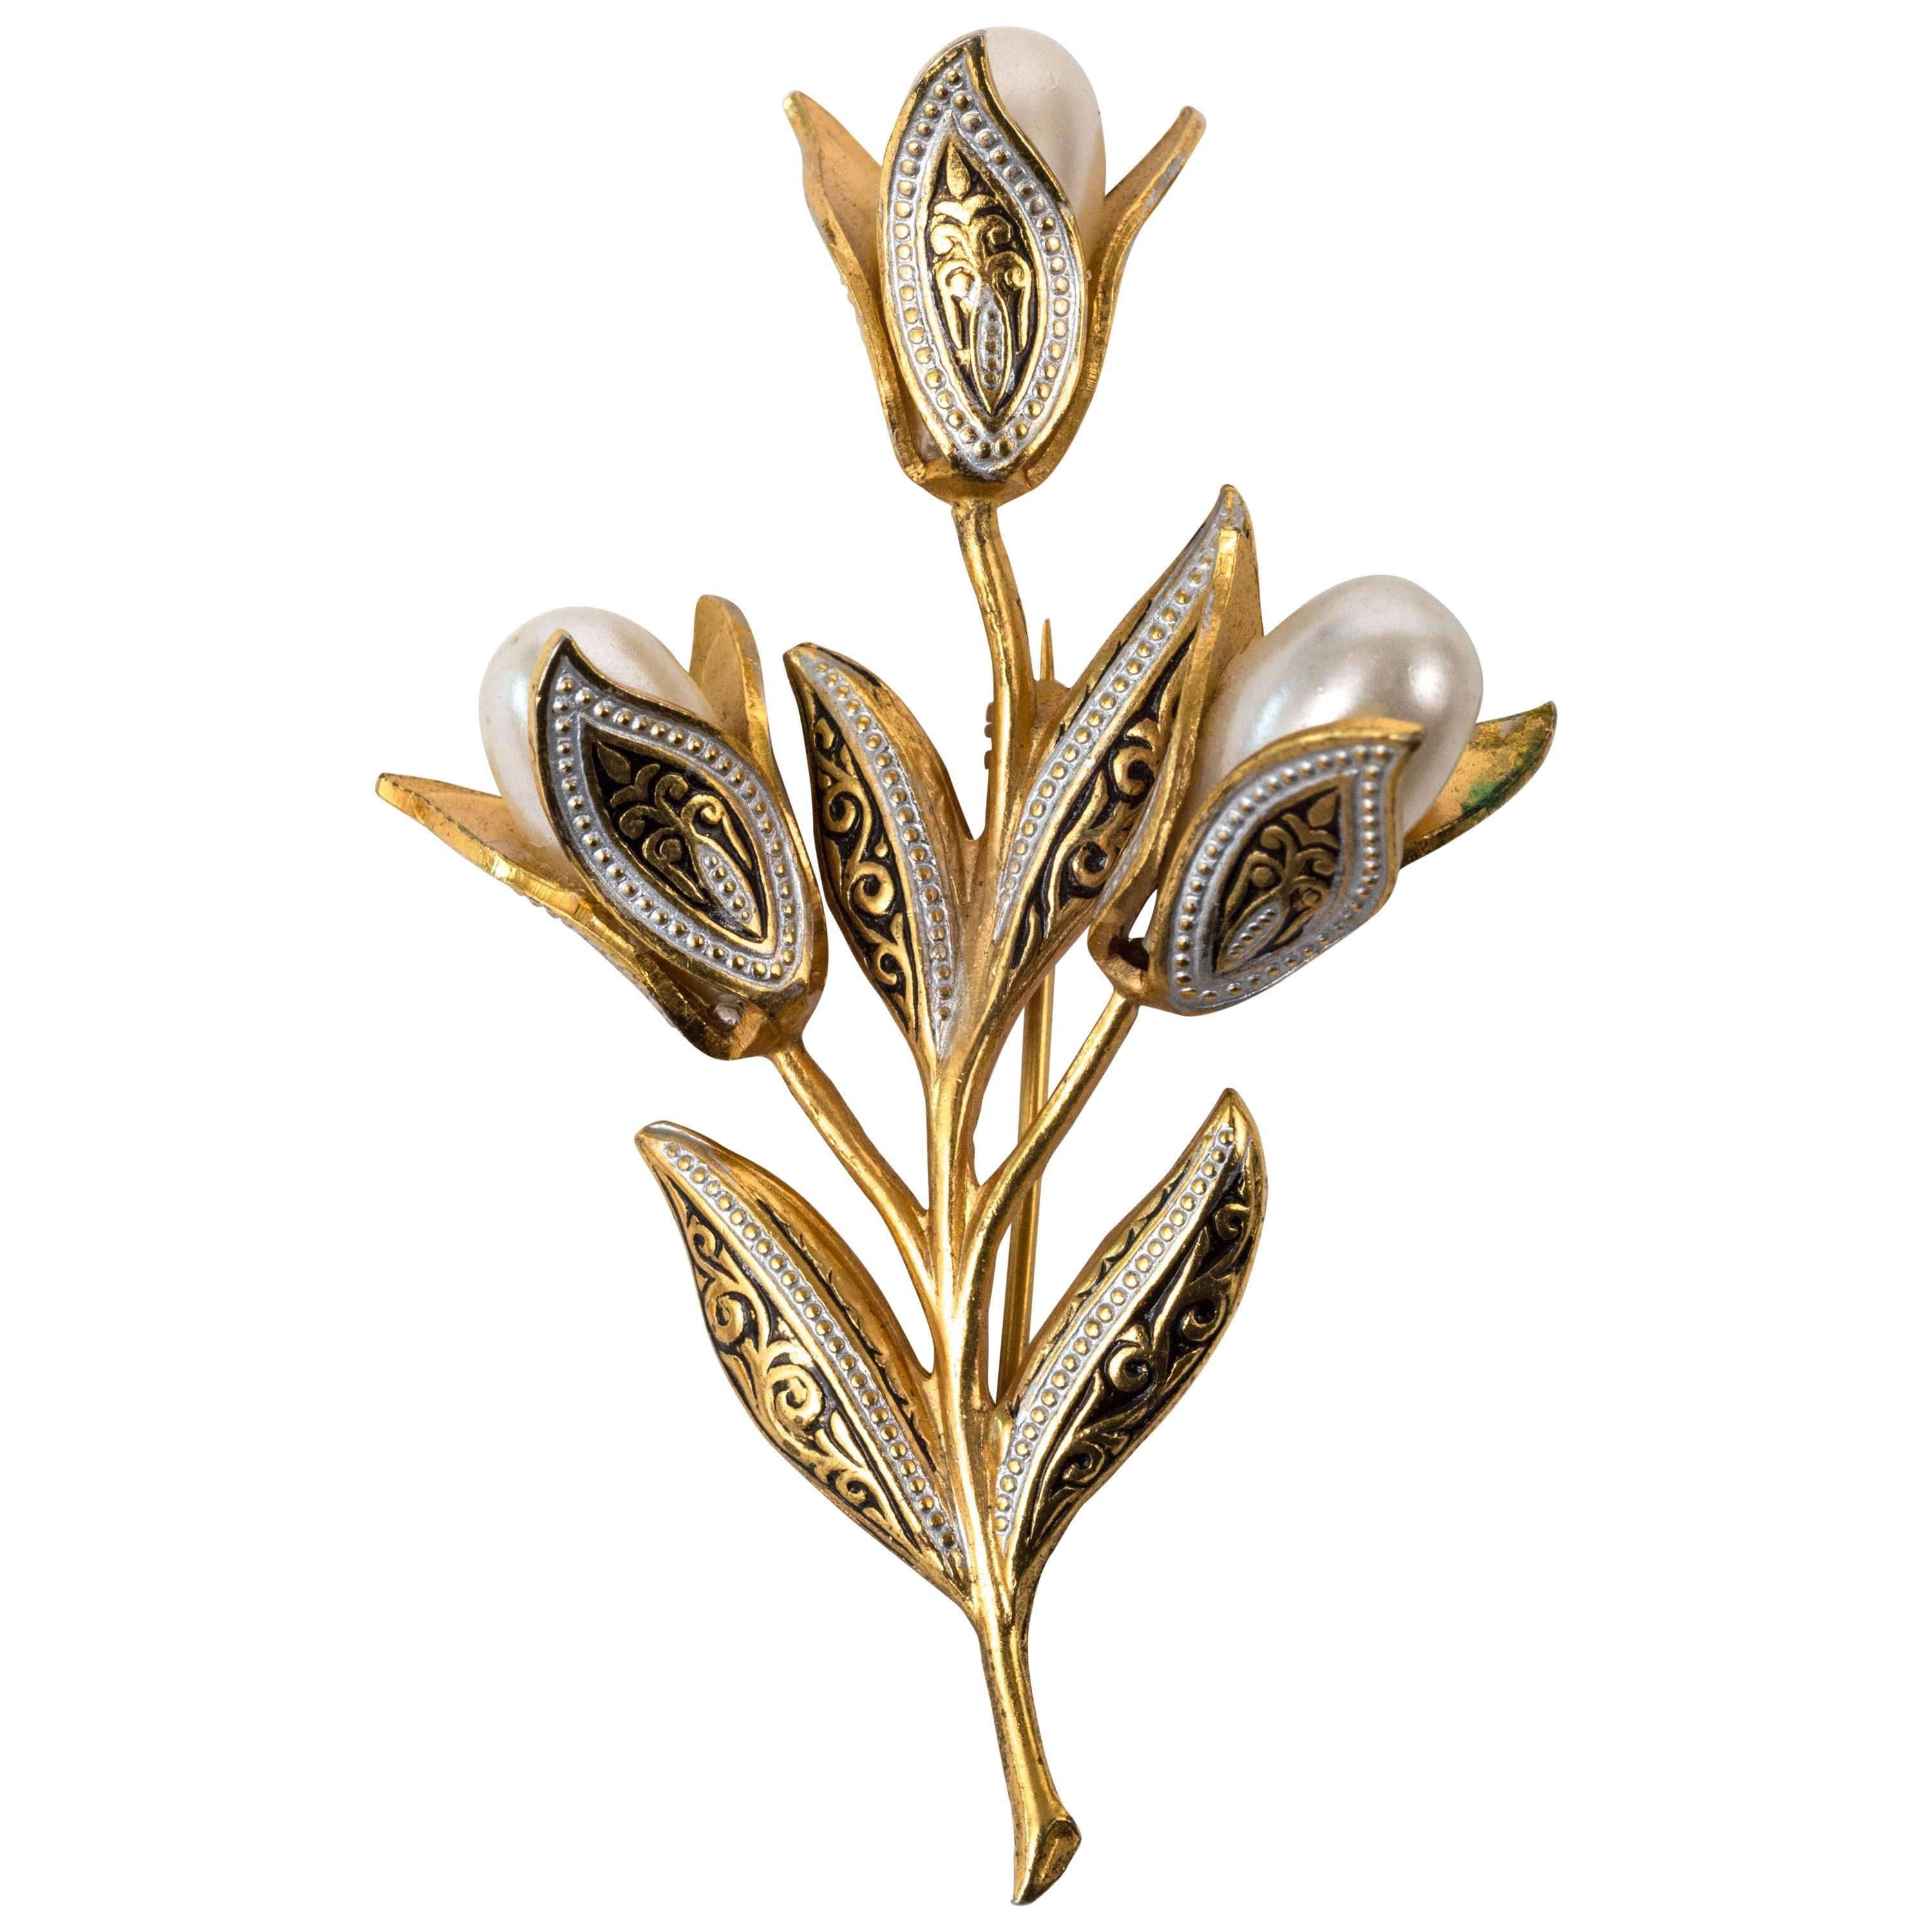 Vintage Damascene Pearl Centered Flowers Pin, Made in Spain